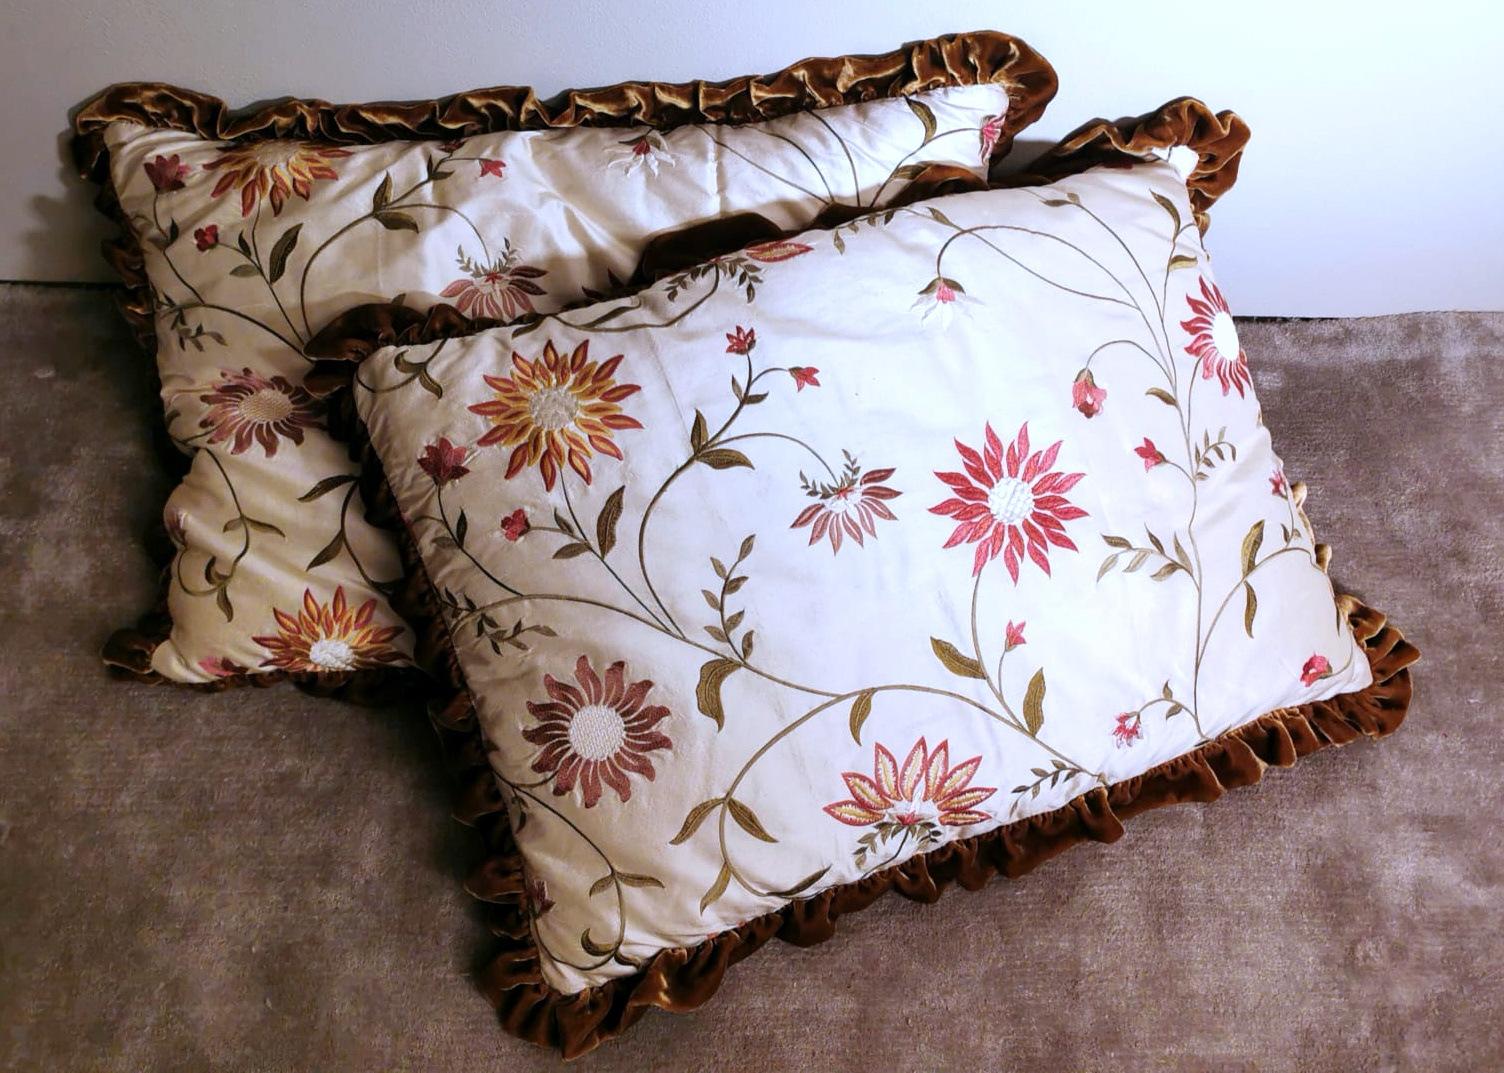 We kindly suggest you read the whole description, because with it we try to give you detailed technical and historical information to guarantee the authenticity of our objects.
Refined pair of embroidered silk cushions, brown silk velvet back, and